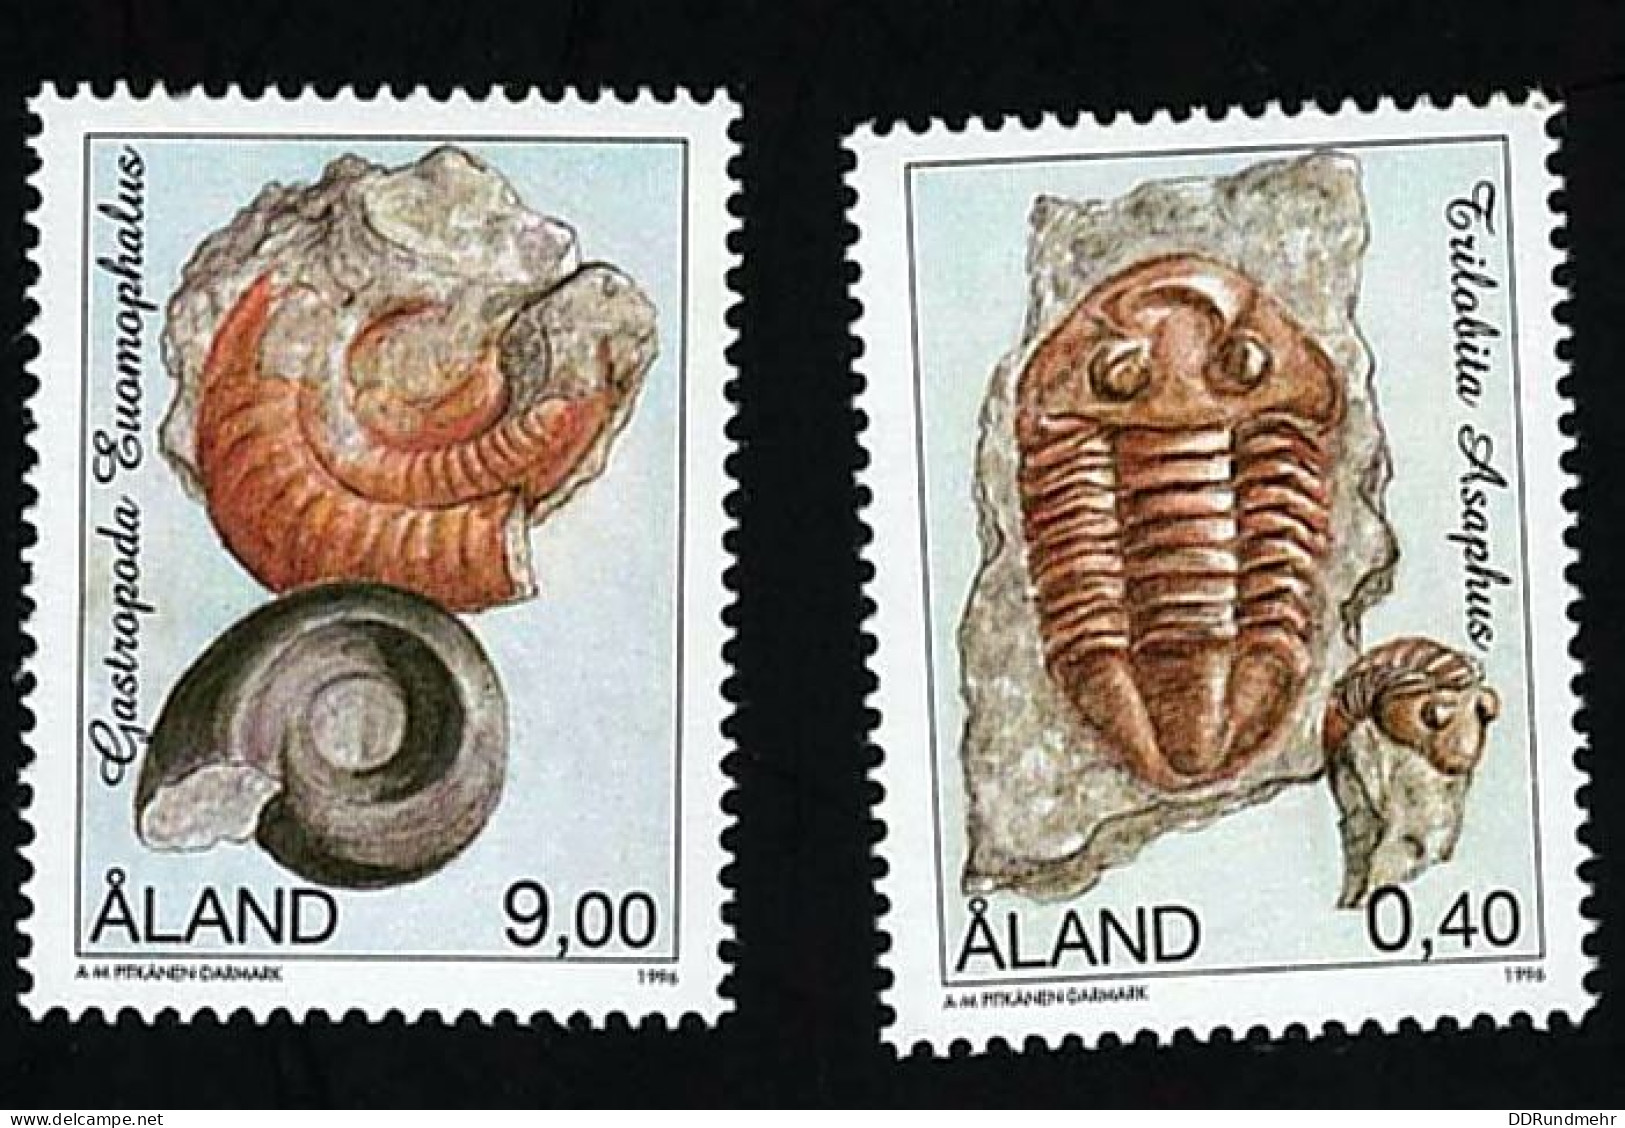 1996 Fossilien  Michel AX 117 - 118 Stamp Number AX 85 - 86 Yvert Et Tellier AX 118 - 119 Xx MNH - Aland